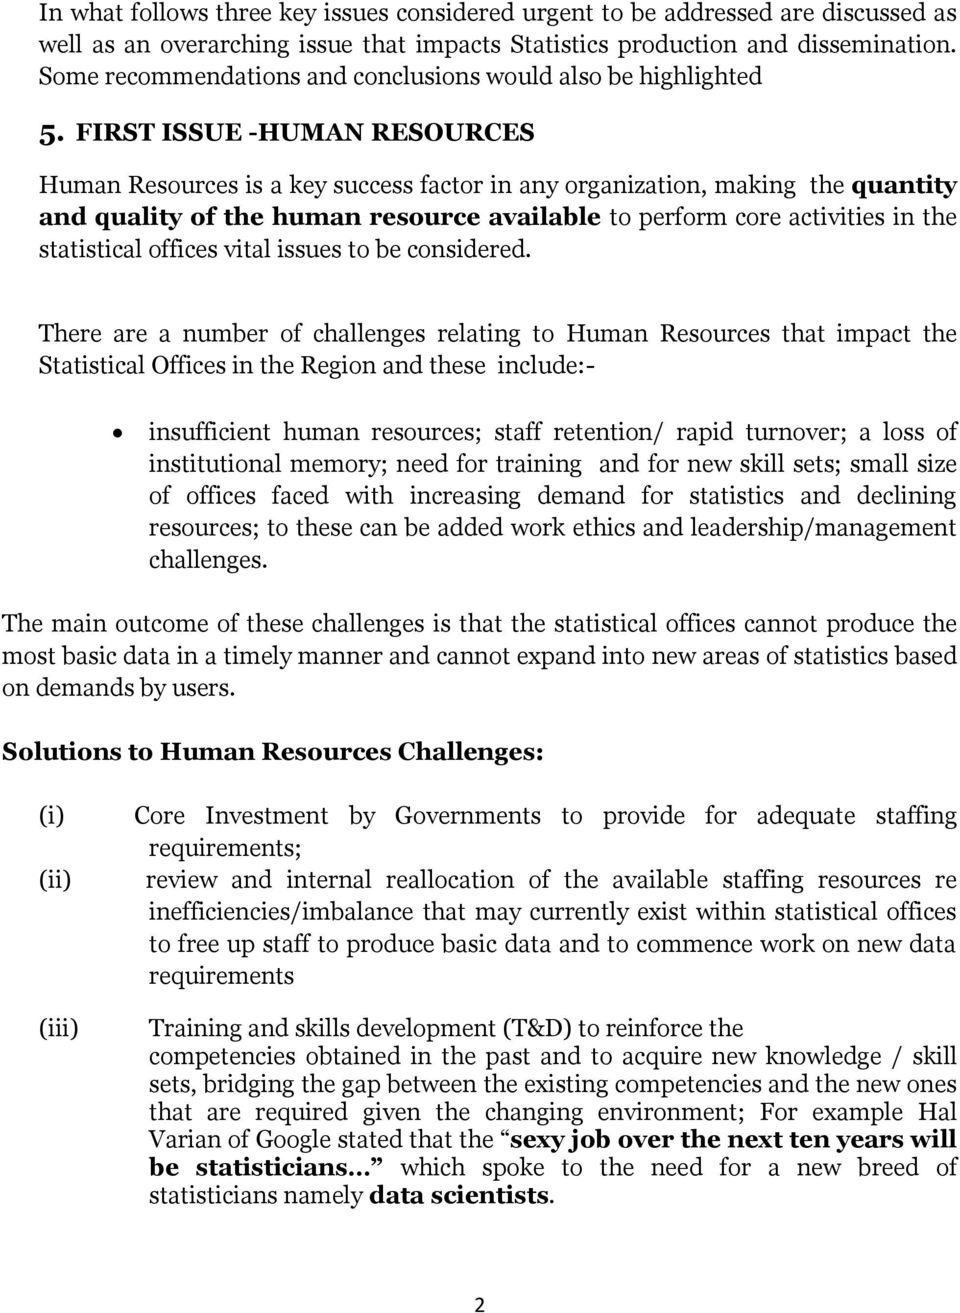 FIRST ISSUE -HUMAN RESOURCES Human Resources is a key success factor in any organization, making the quantity and quality of the human resource available to perform core activities in the statistical